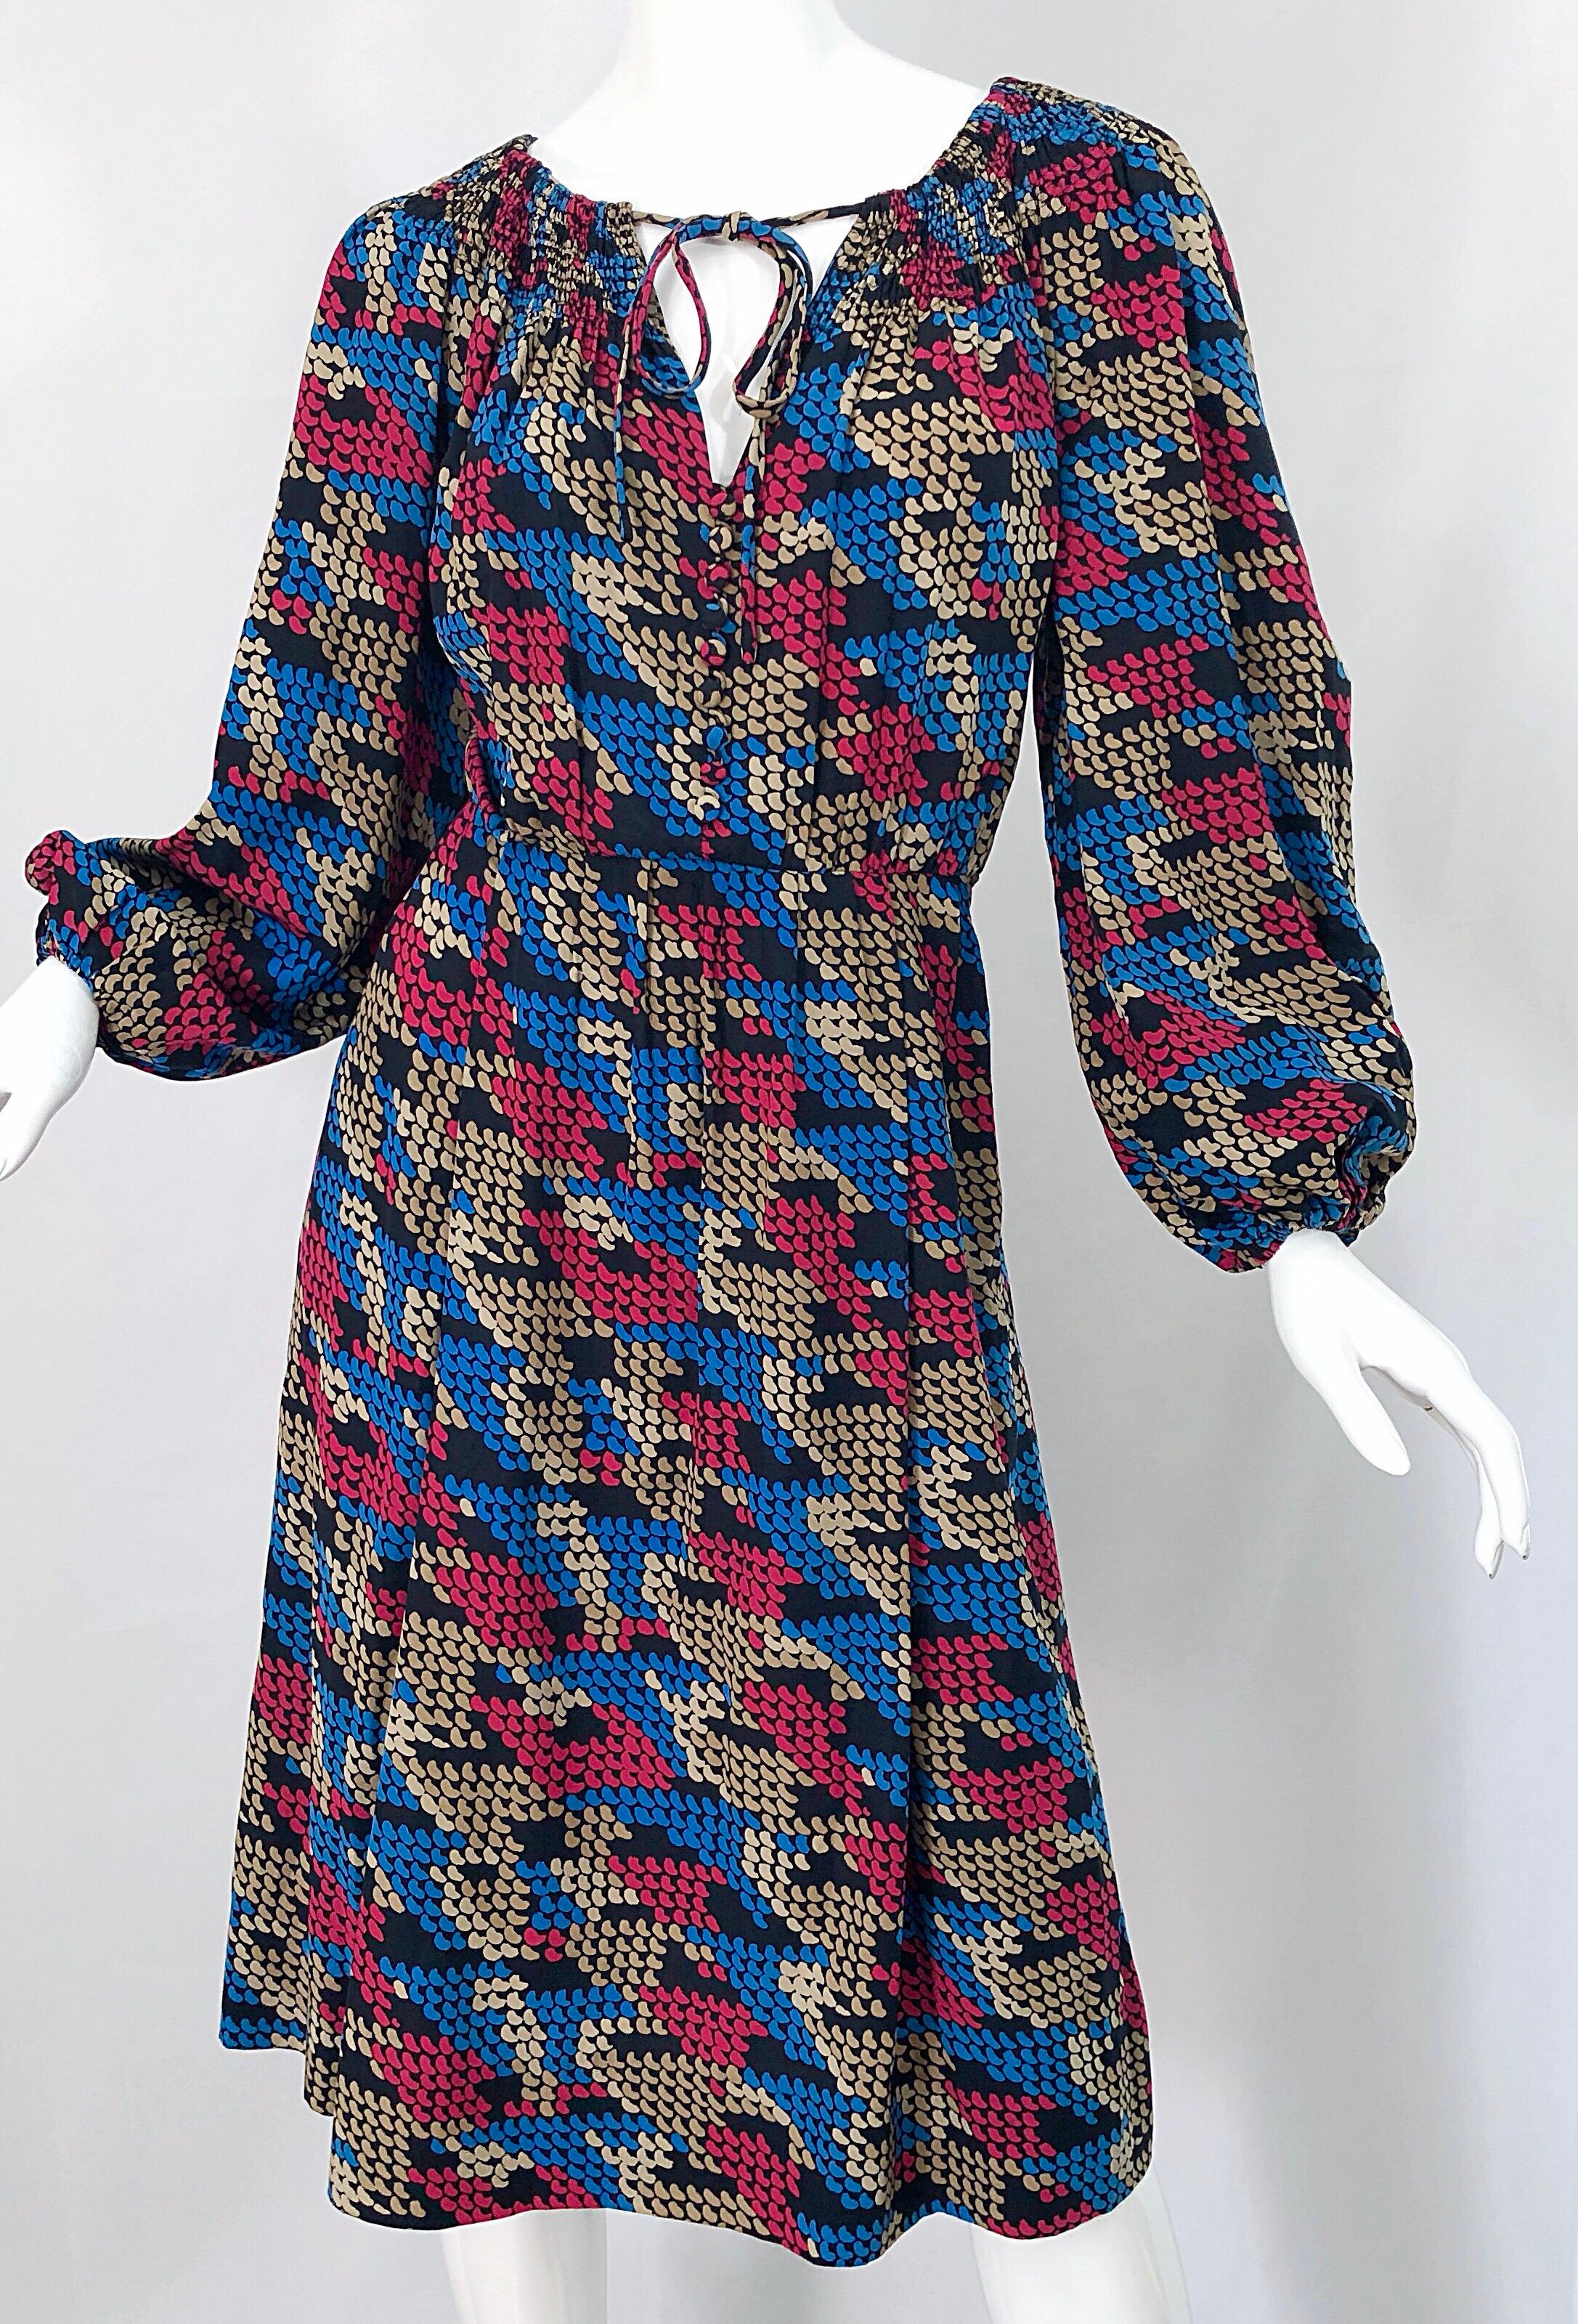 Givenchy Haute Couture 1970s Exaggerated Houndstooth Bishop Sleeve Vintage Dress For Sale 6